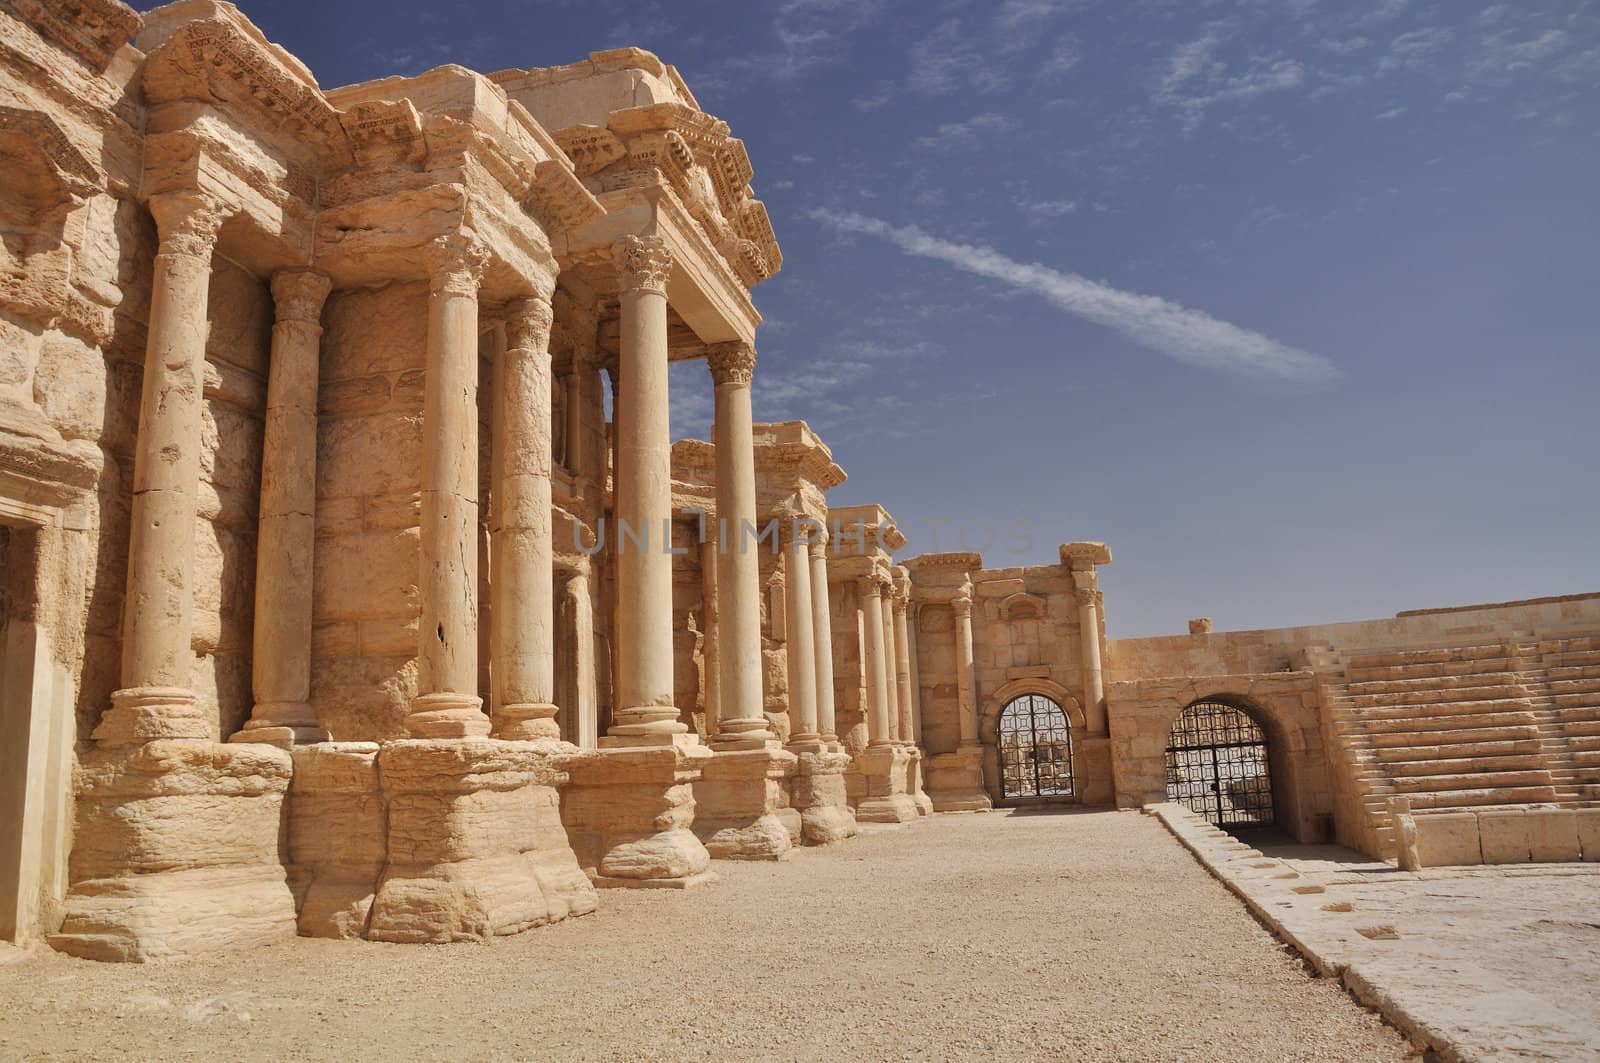 The second most noteworthy remain in Palmyra is the theater, today having 9 rows of seating, but most likely having up to 12 with the addition of wooden structures. It has been dated to the early 1st century AD.